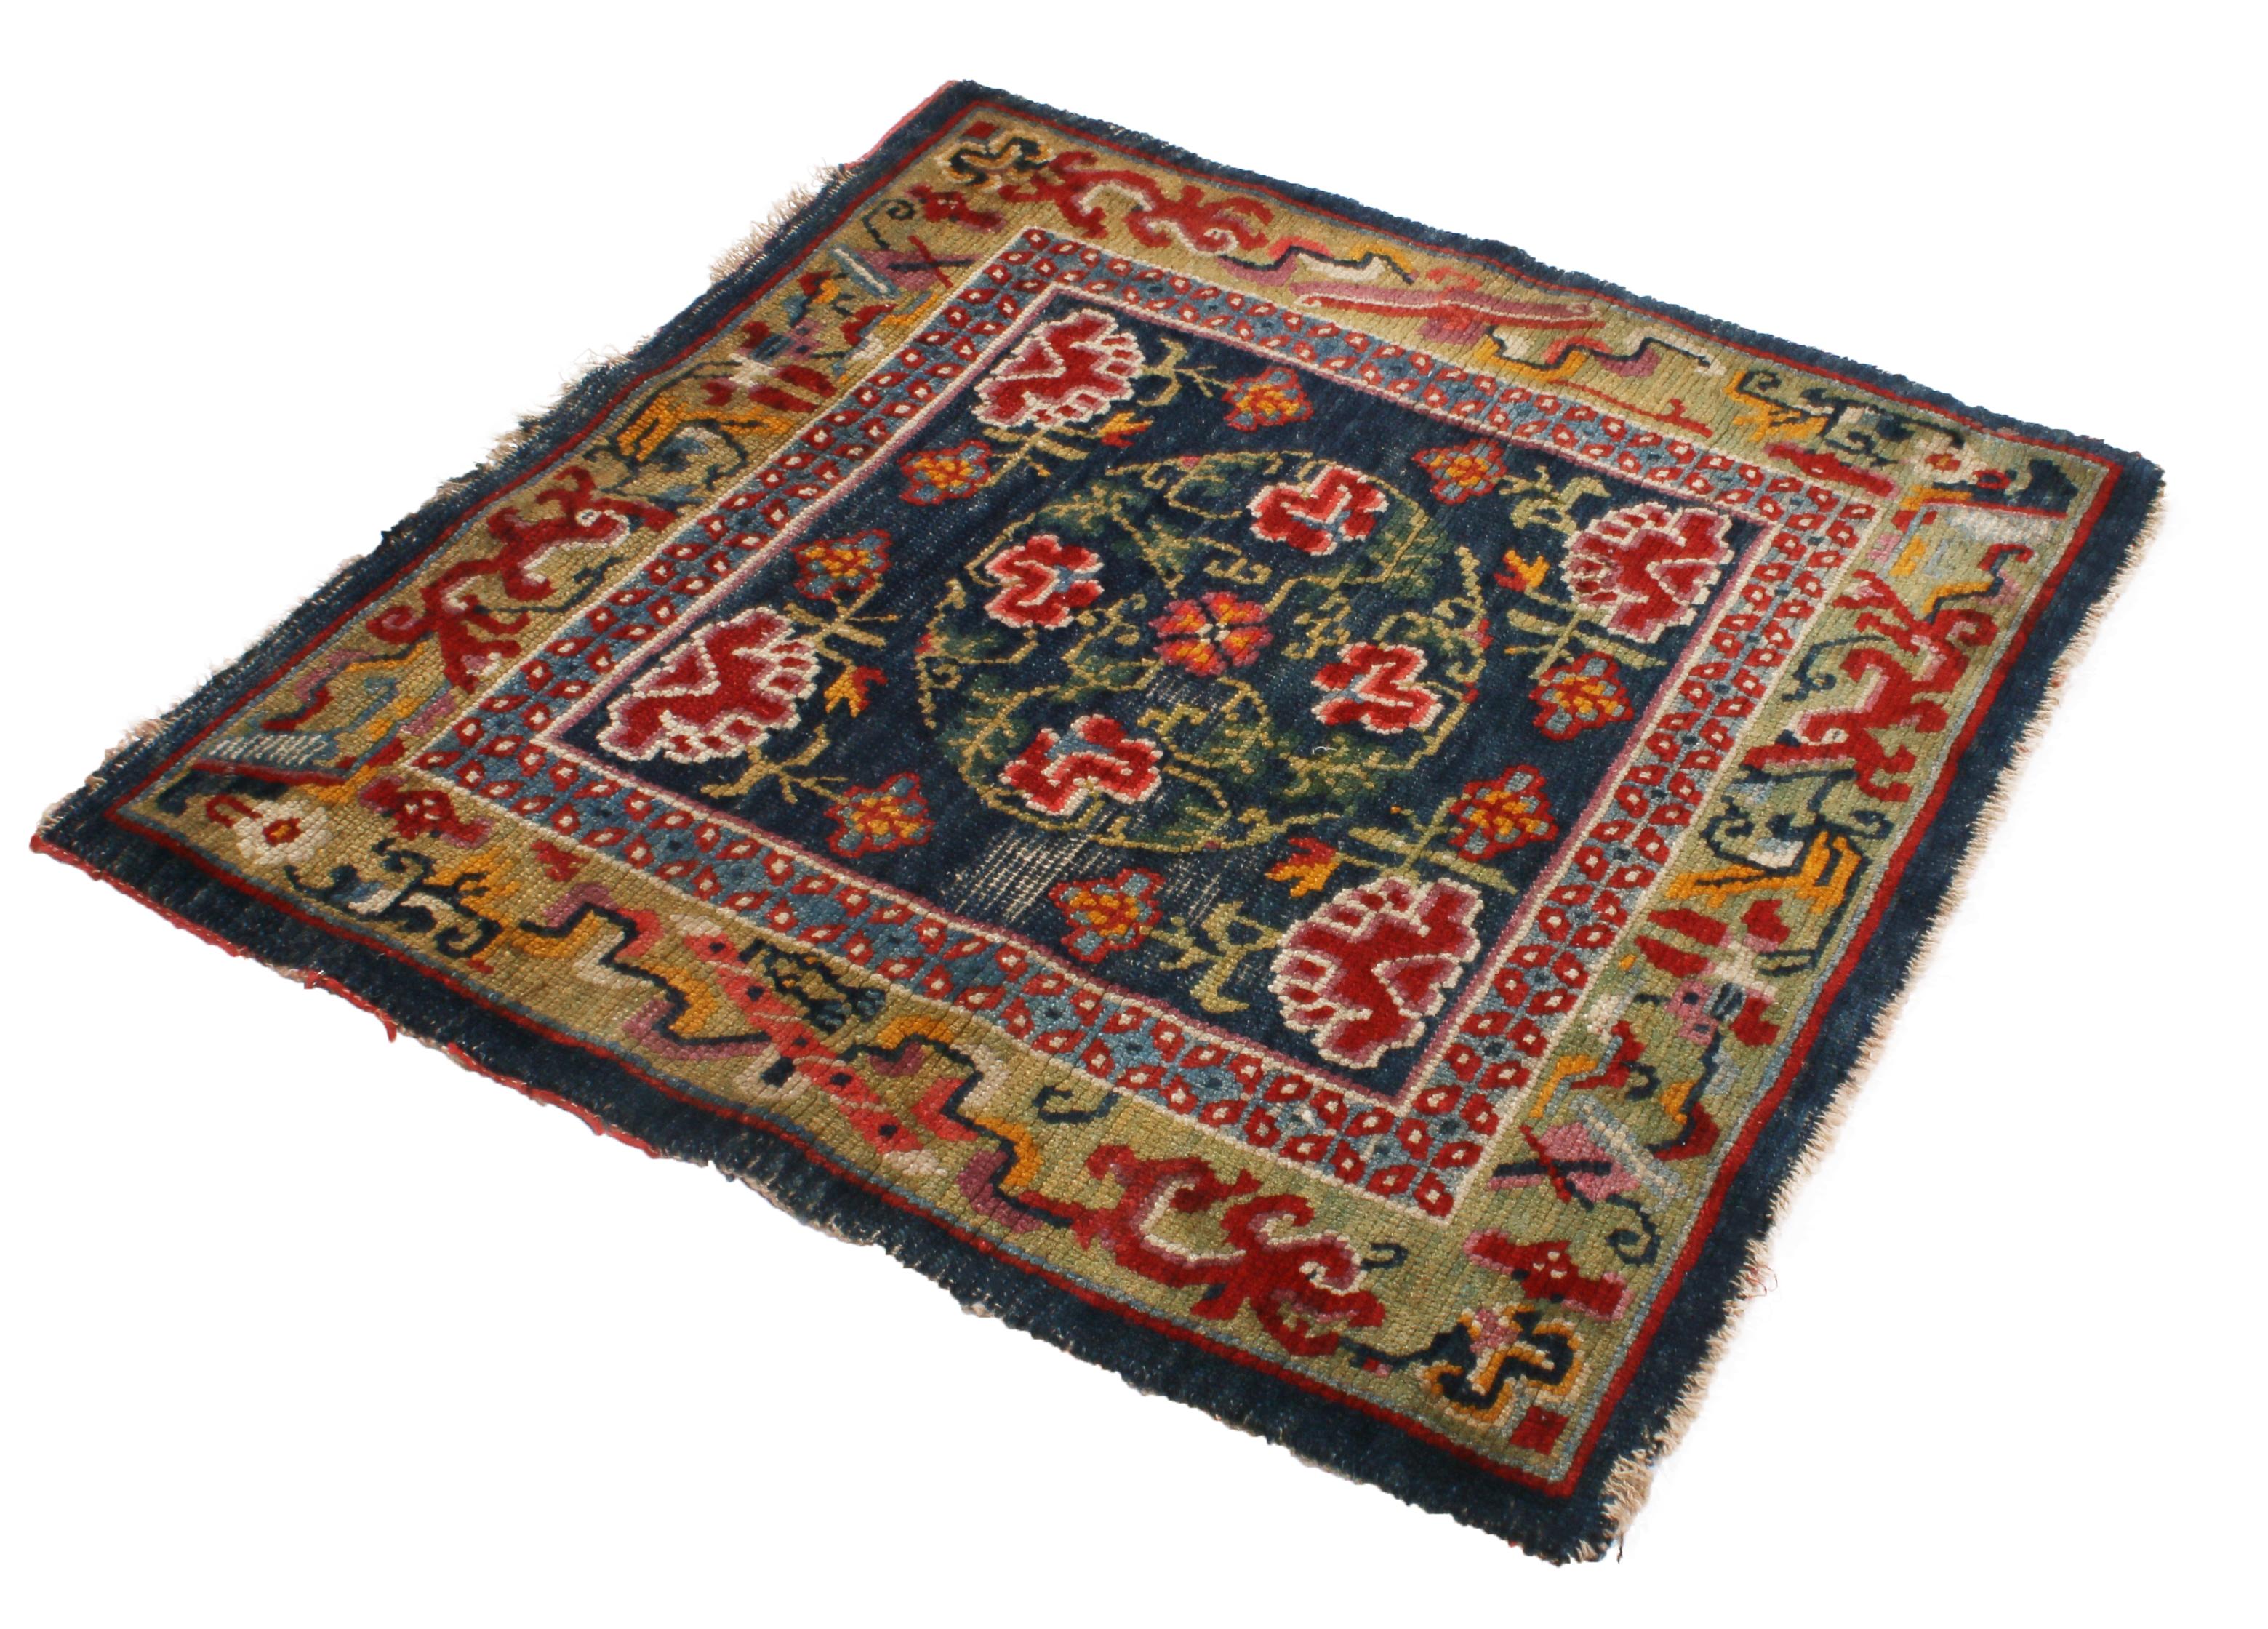 Originating from Nepal in 1910, this antique Tibetan wool rug hosts a variety of curvilinear geometric-floral symbols embodying influences from Chinese Peking and Art Deco pieces. Hand knotted with durable wool pile, the grand green and pink floral